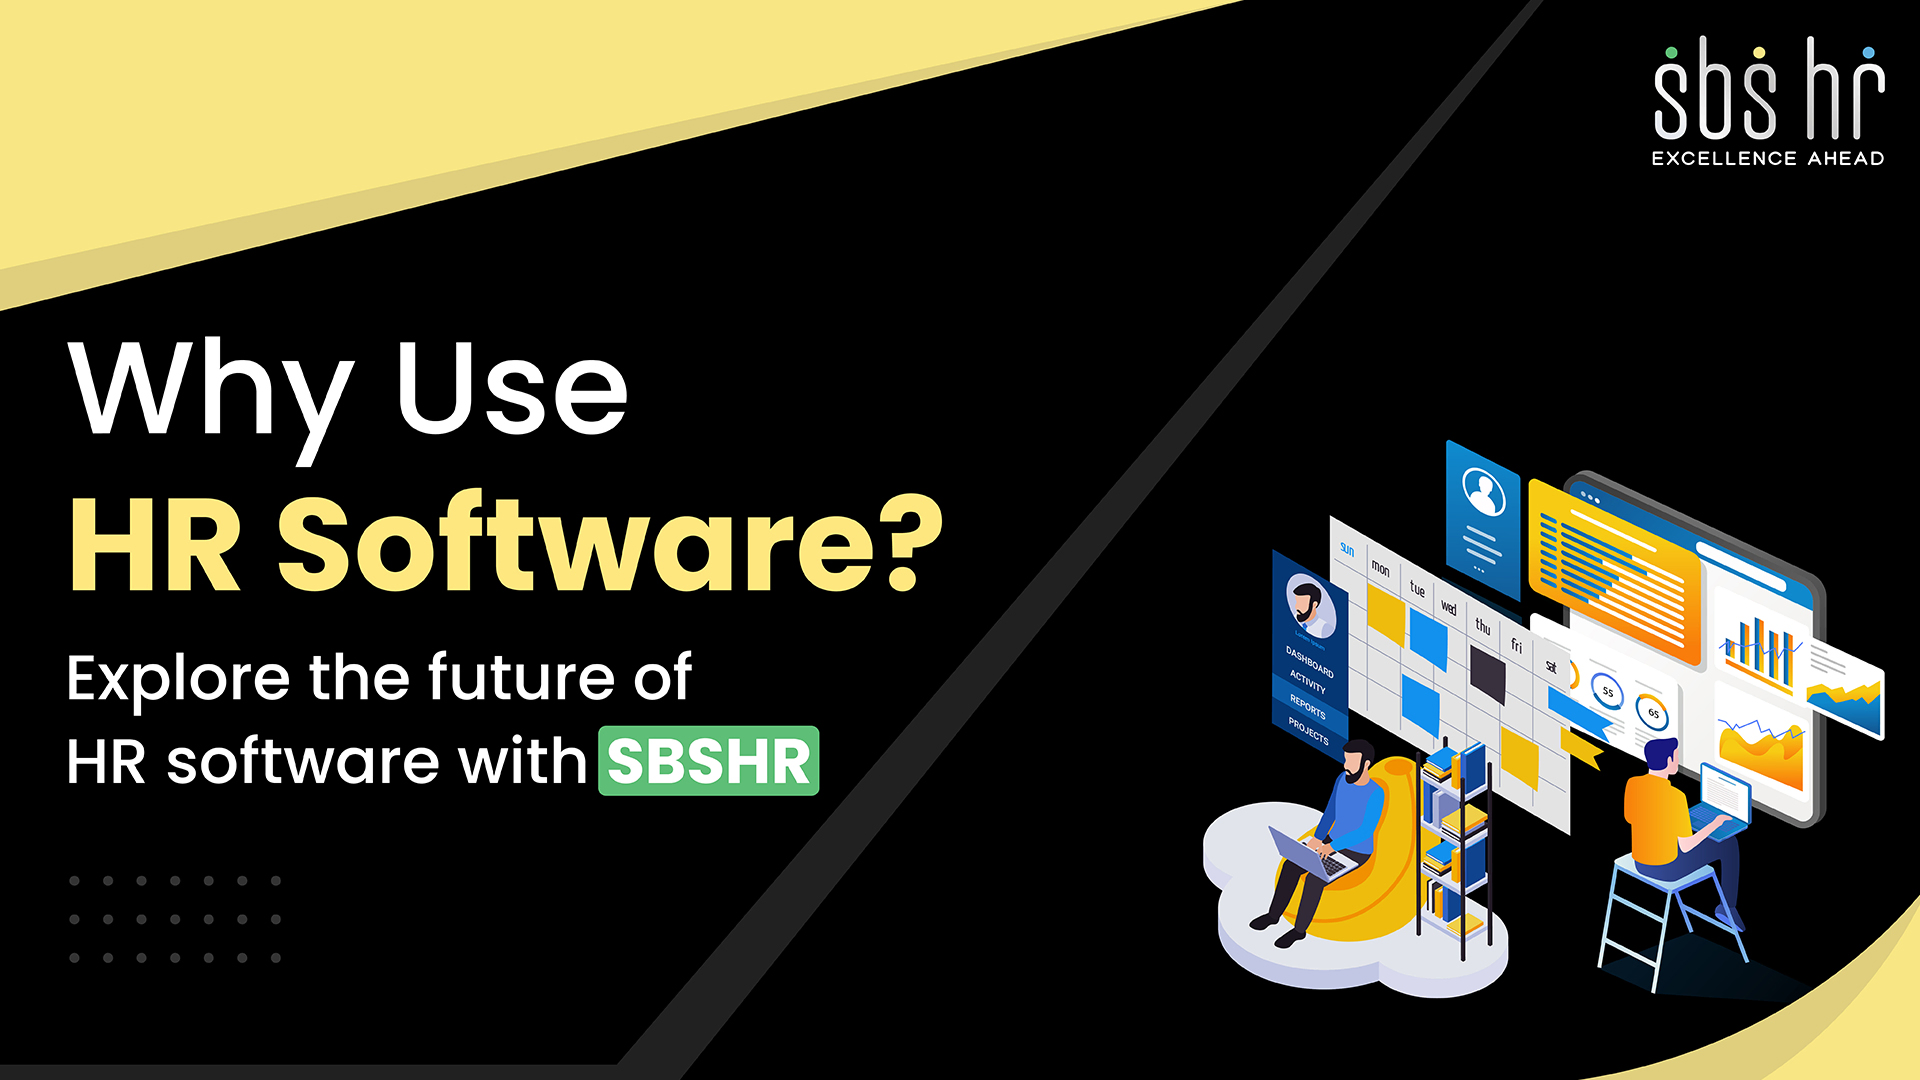 Why choose HR Software? Explore the future of HR software with SBSHR